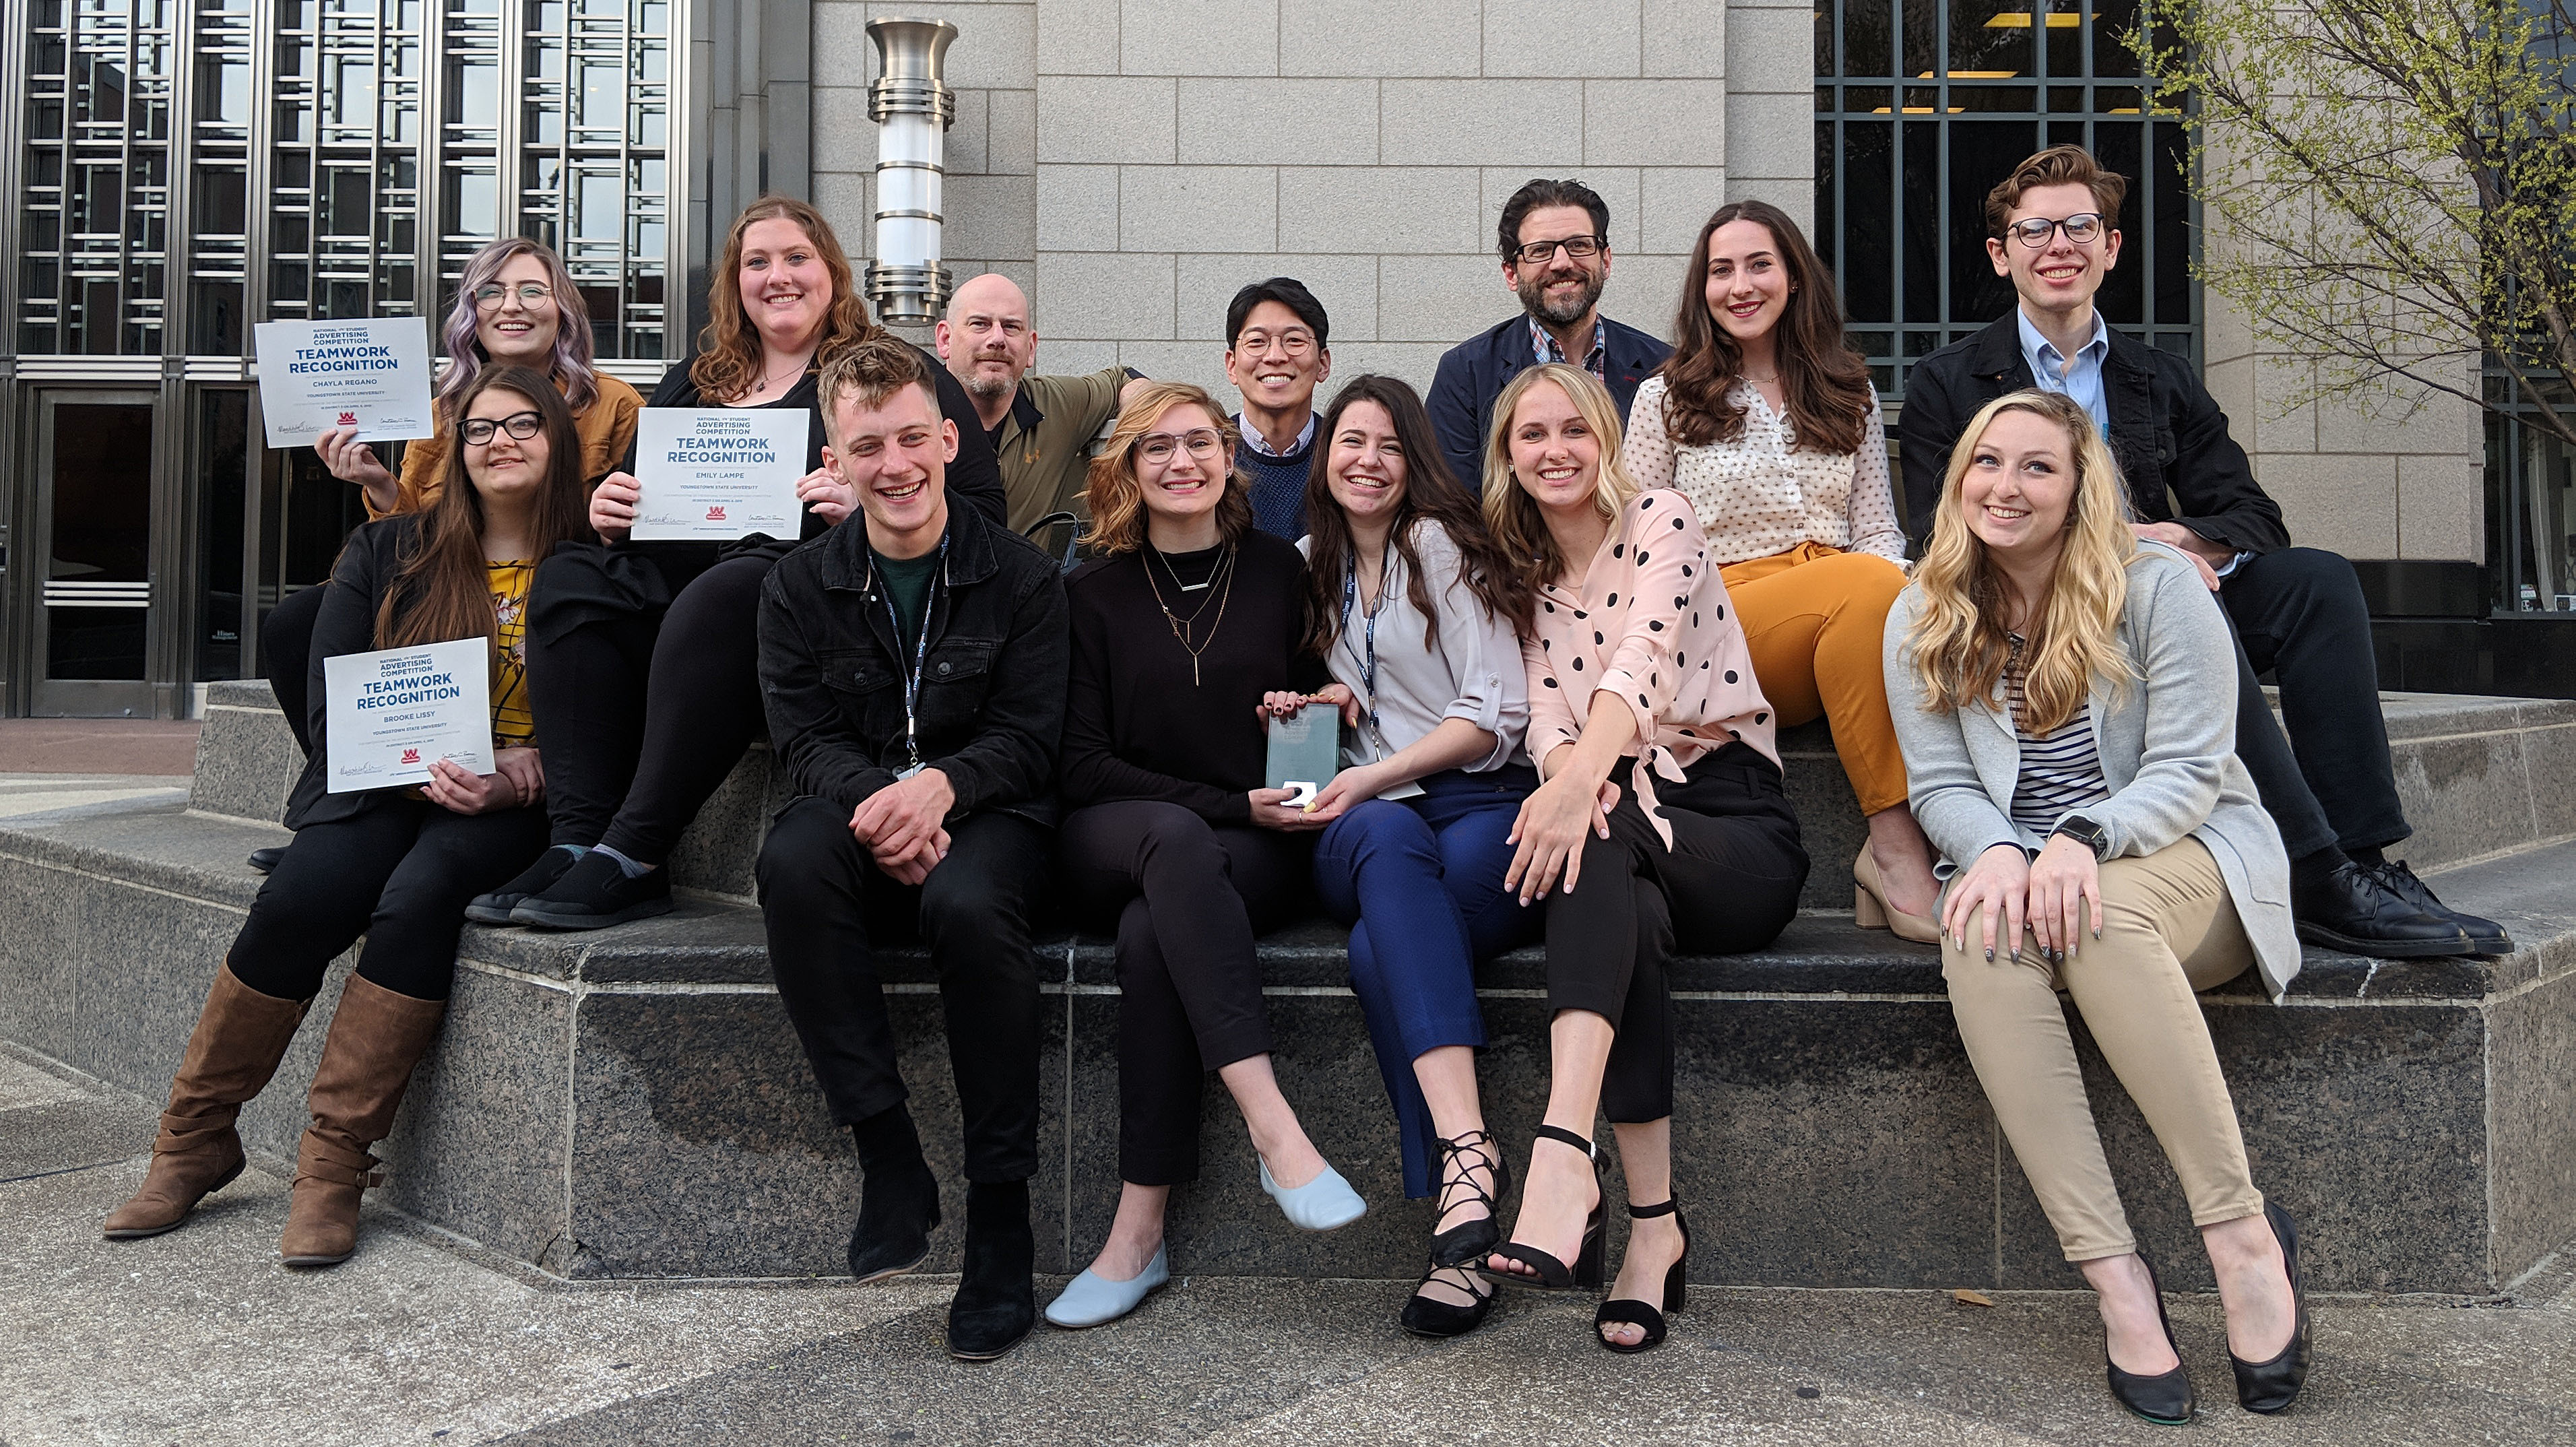 The YSU Ads Club came in third overall, and senior Anna Henkels won the Best Presenter Award, at the American Adversiting Federation's National Student Advertising Competition. From the left are, first row, Chayla Regano, Brooke Lissy, Emily Lampe, Jacob Zillinger, Anna Henkels, Jessica Hood, Zoey Novack, Breanna Irwin, and back row advisors Rich Helfrich, Doori Song, Michael Pontikos, and Megan Factor, Gryphon Johnson.